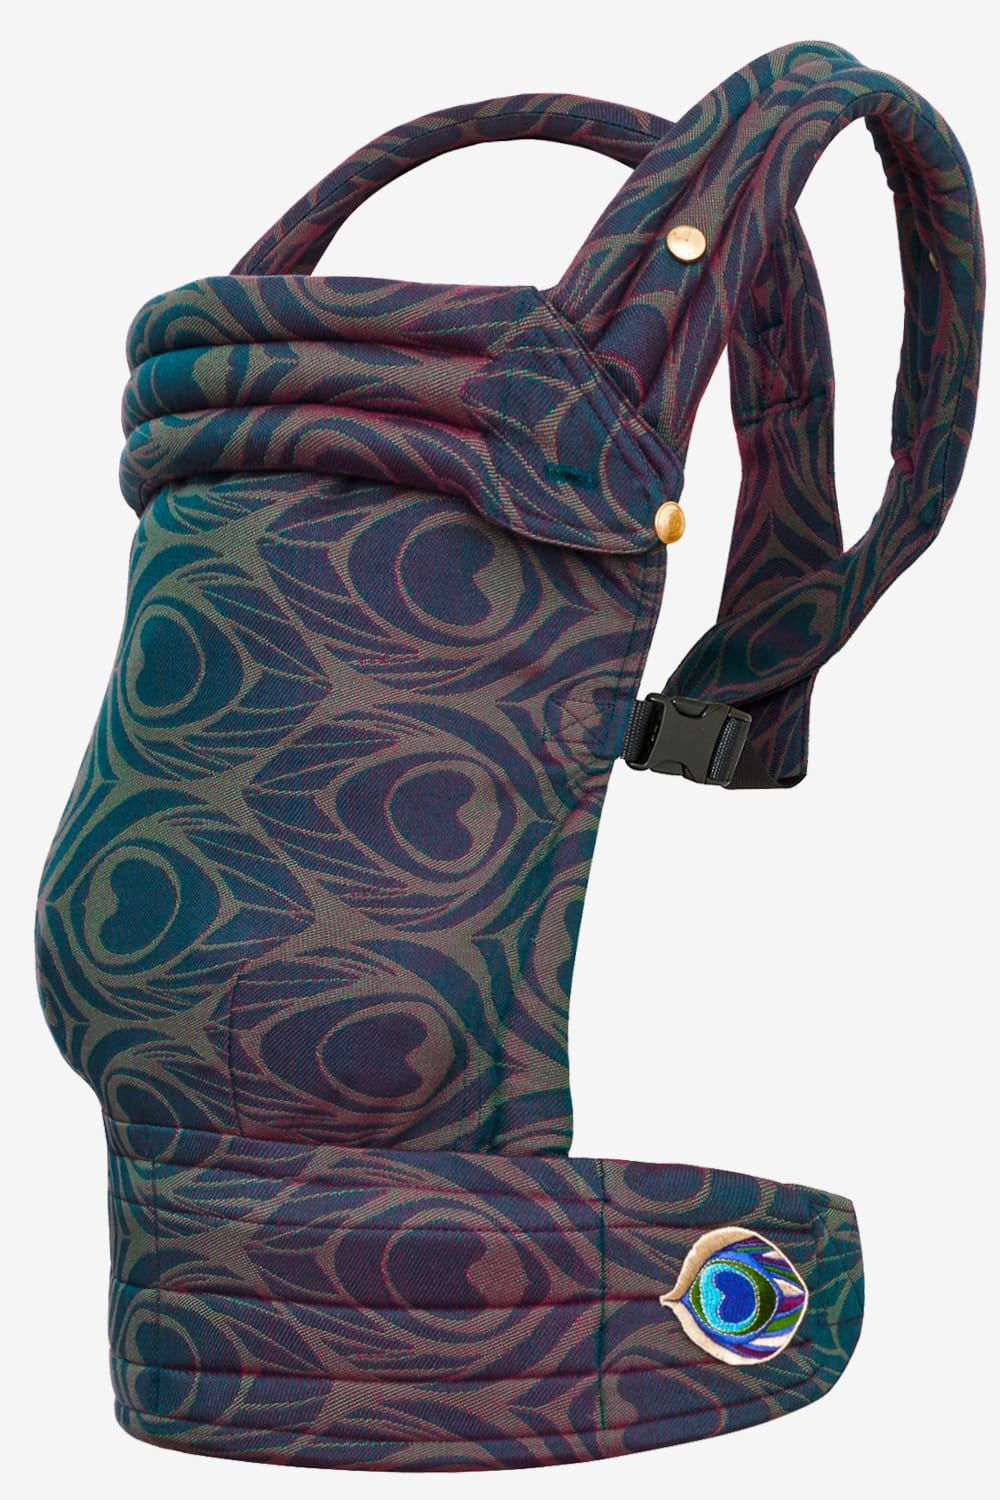 Dark green baby carrier with peacock feather print in a cotton blend